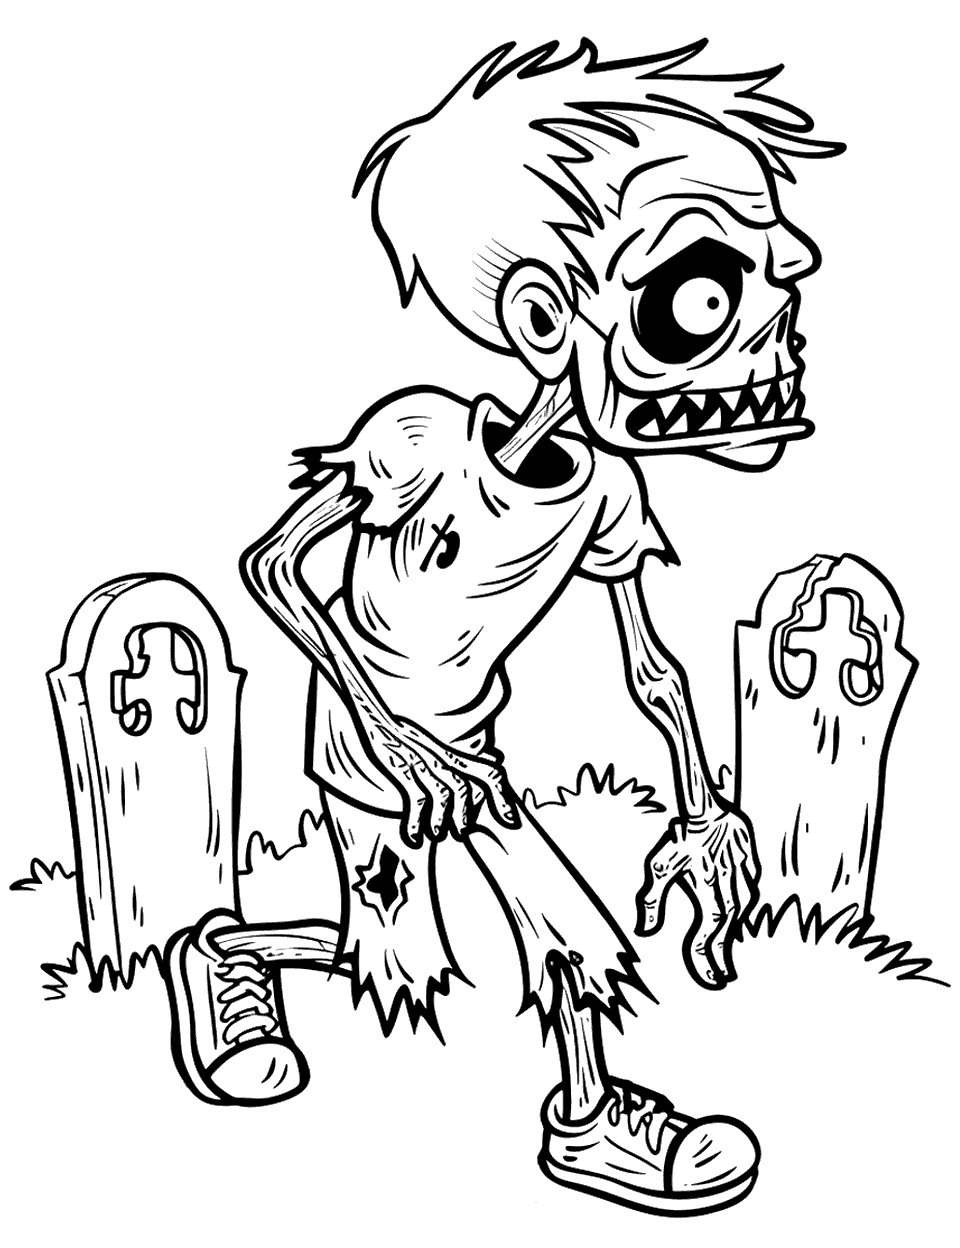 Realistic Zombie Walking Coloring Page - A detailed depiction of a zombie walking through a graveyard.